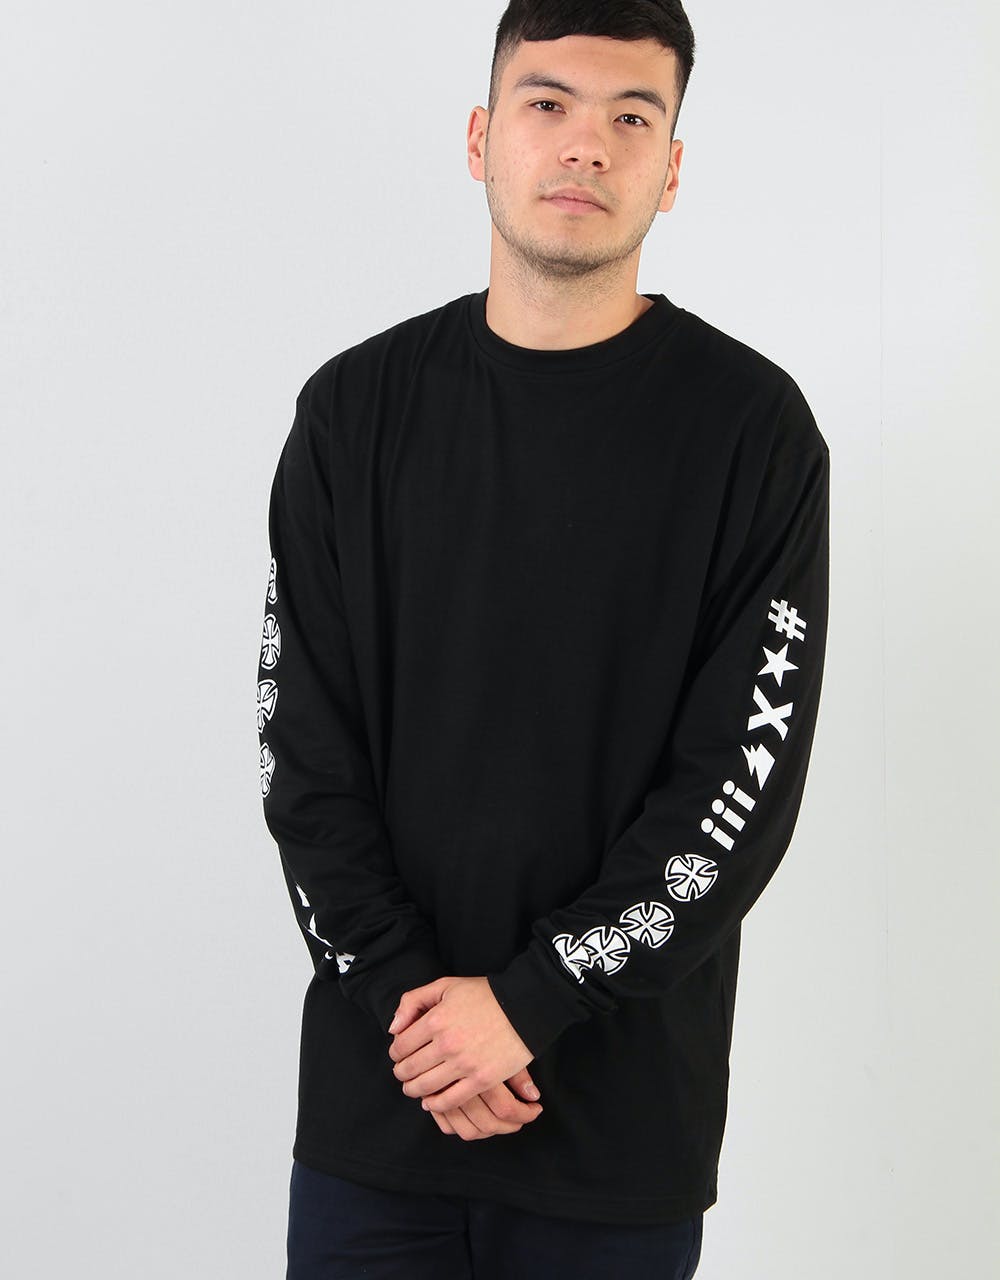 Independent Ante L/S T-Shirt - Black